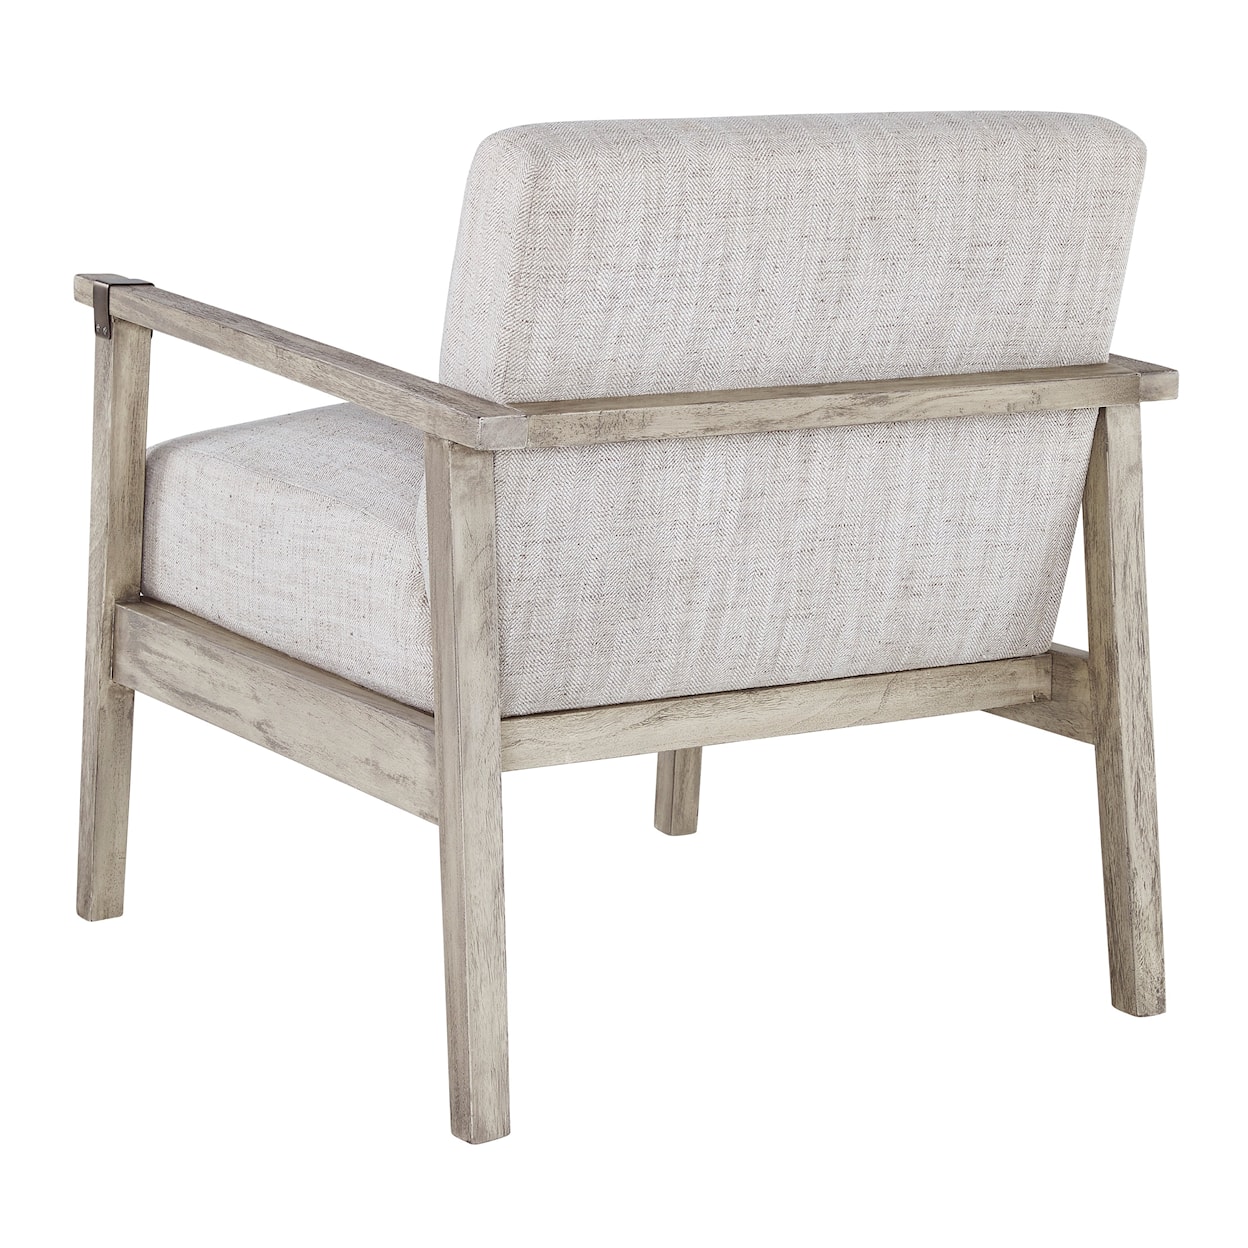 Benchcraft Dalenville Accent Chair